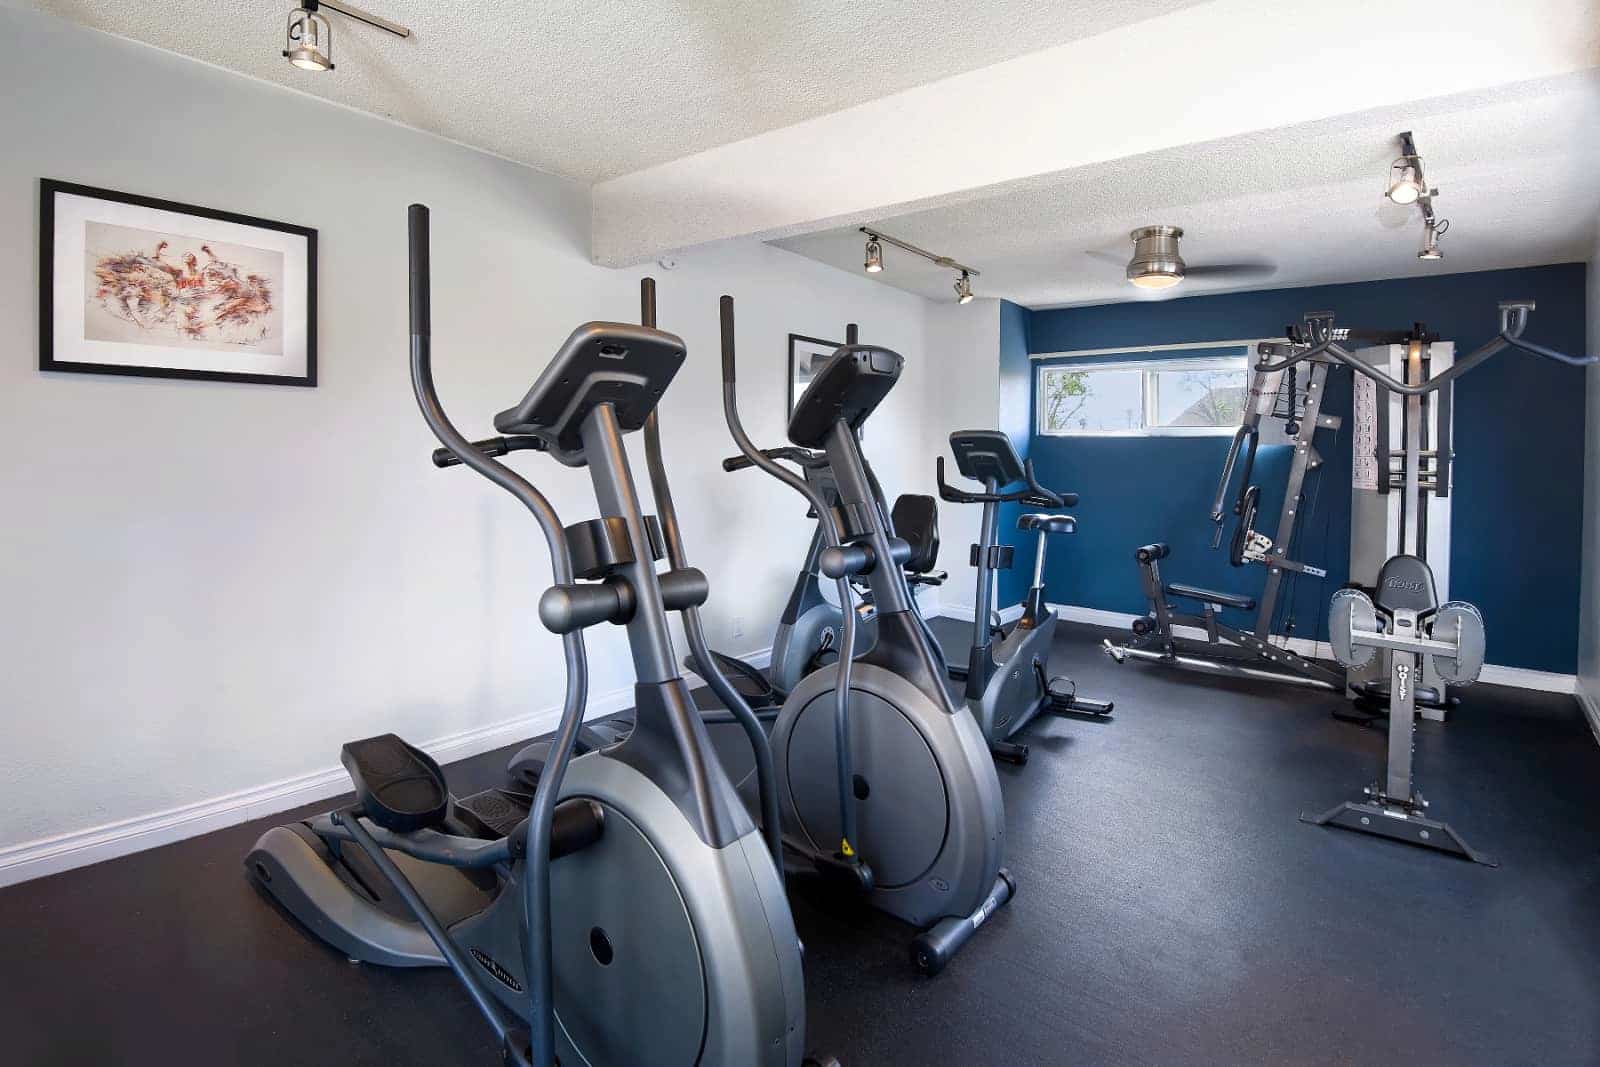 Fitness center with exercise equipment.